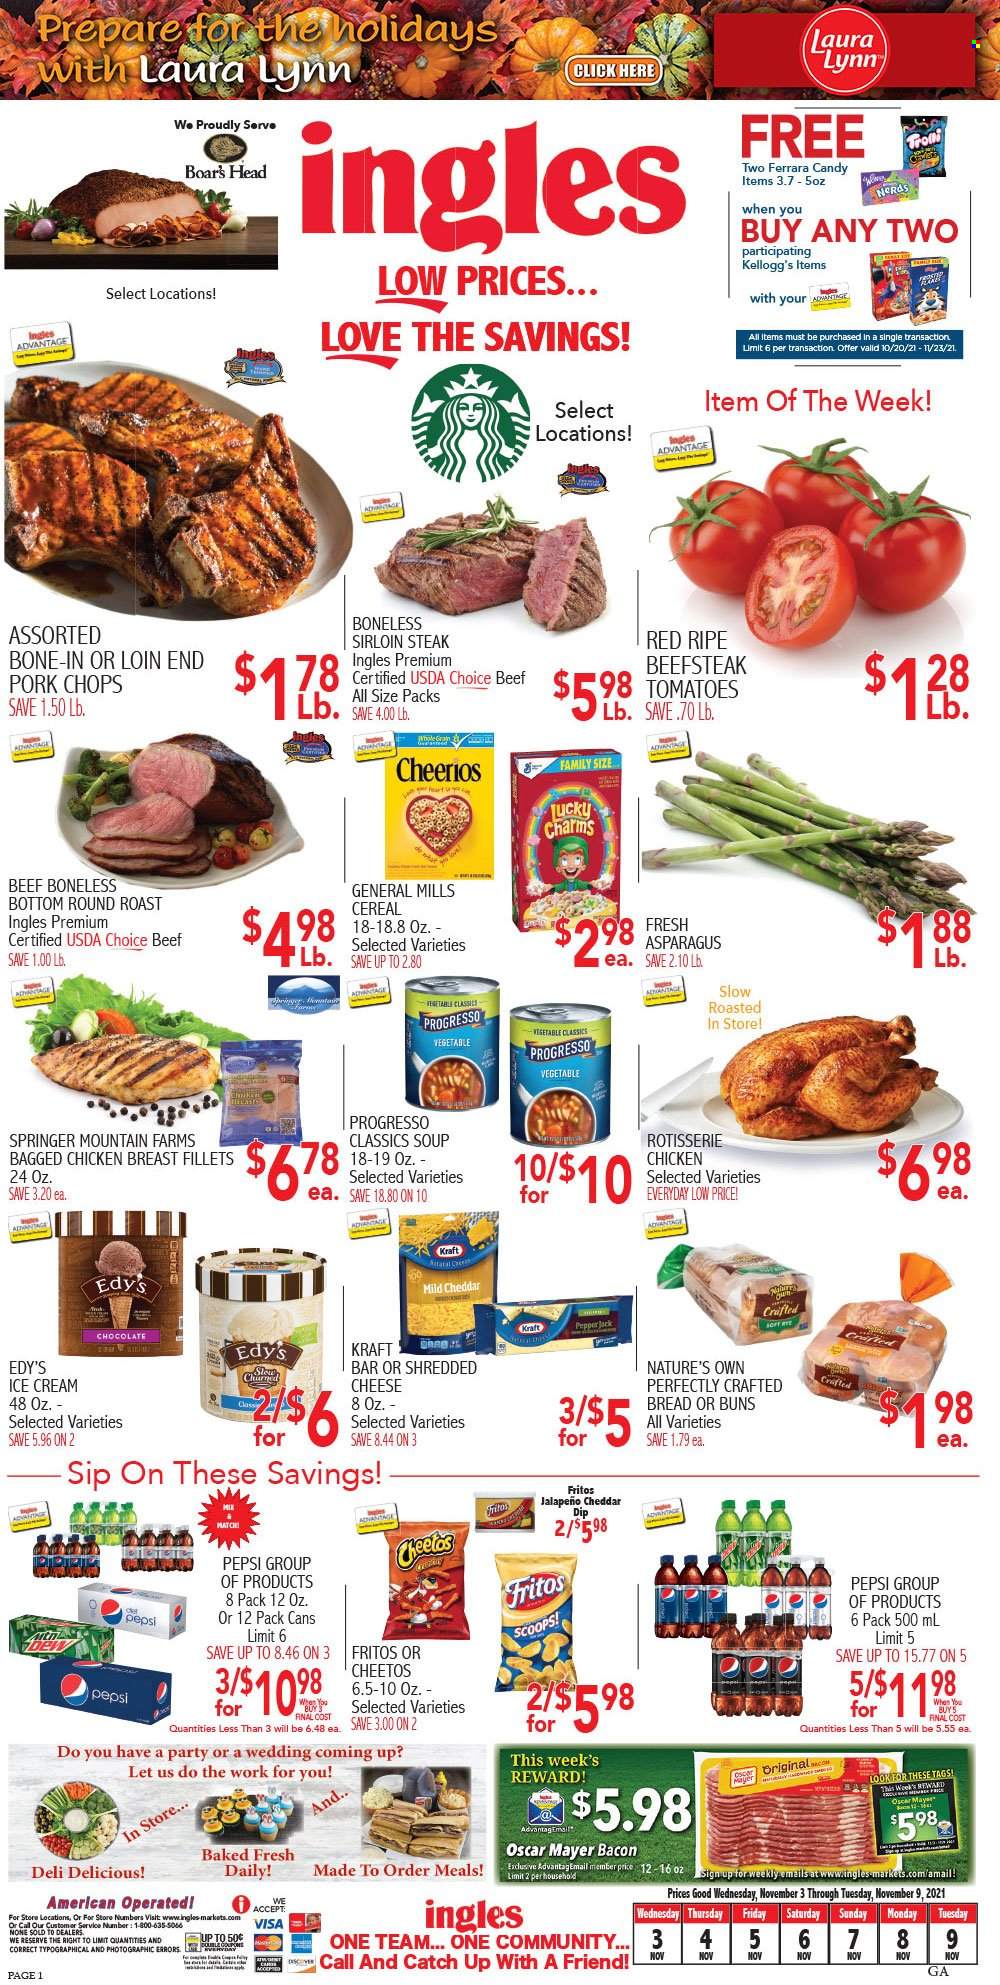 thumbnail - Ingles Flyer - 11/03/2021 - 11/09/2021 - Sales products - bread, buns, asparagus, tomatoes, jalapeño, chicken roast, soup, Progresso, Kraft®, bacon, Oscar Mayer, shredded cheese, cheddar, Pepper Jack cheese, dip, ice cream, Kellogg's, Fritos, Cheetos, cereals, Cheerios, Pepsi, chicken breasts, beef meat, beef sirloin, steak, round roast, sirloin steak, pork chops, pork meat, Nature's Own. Page 1.